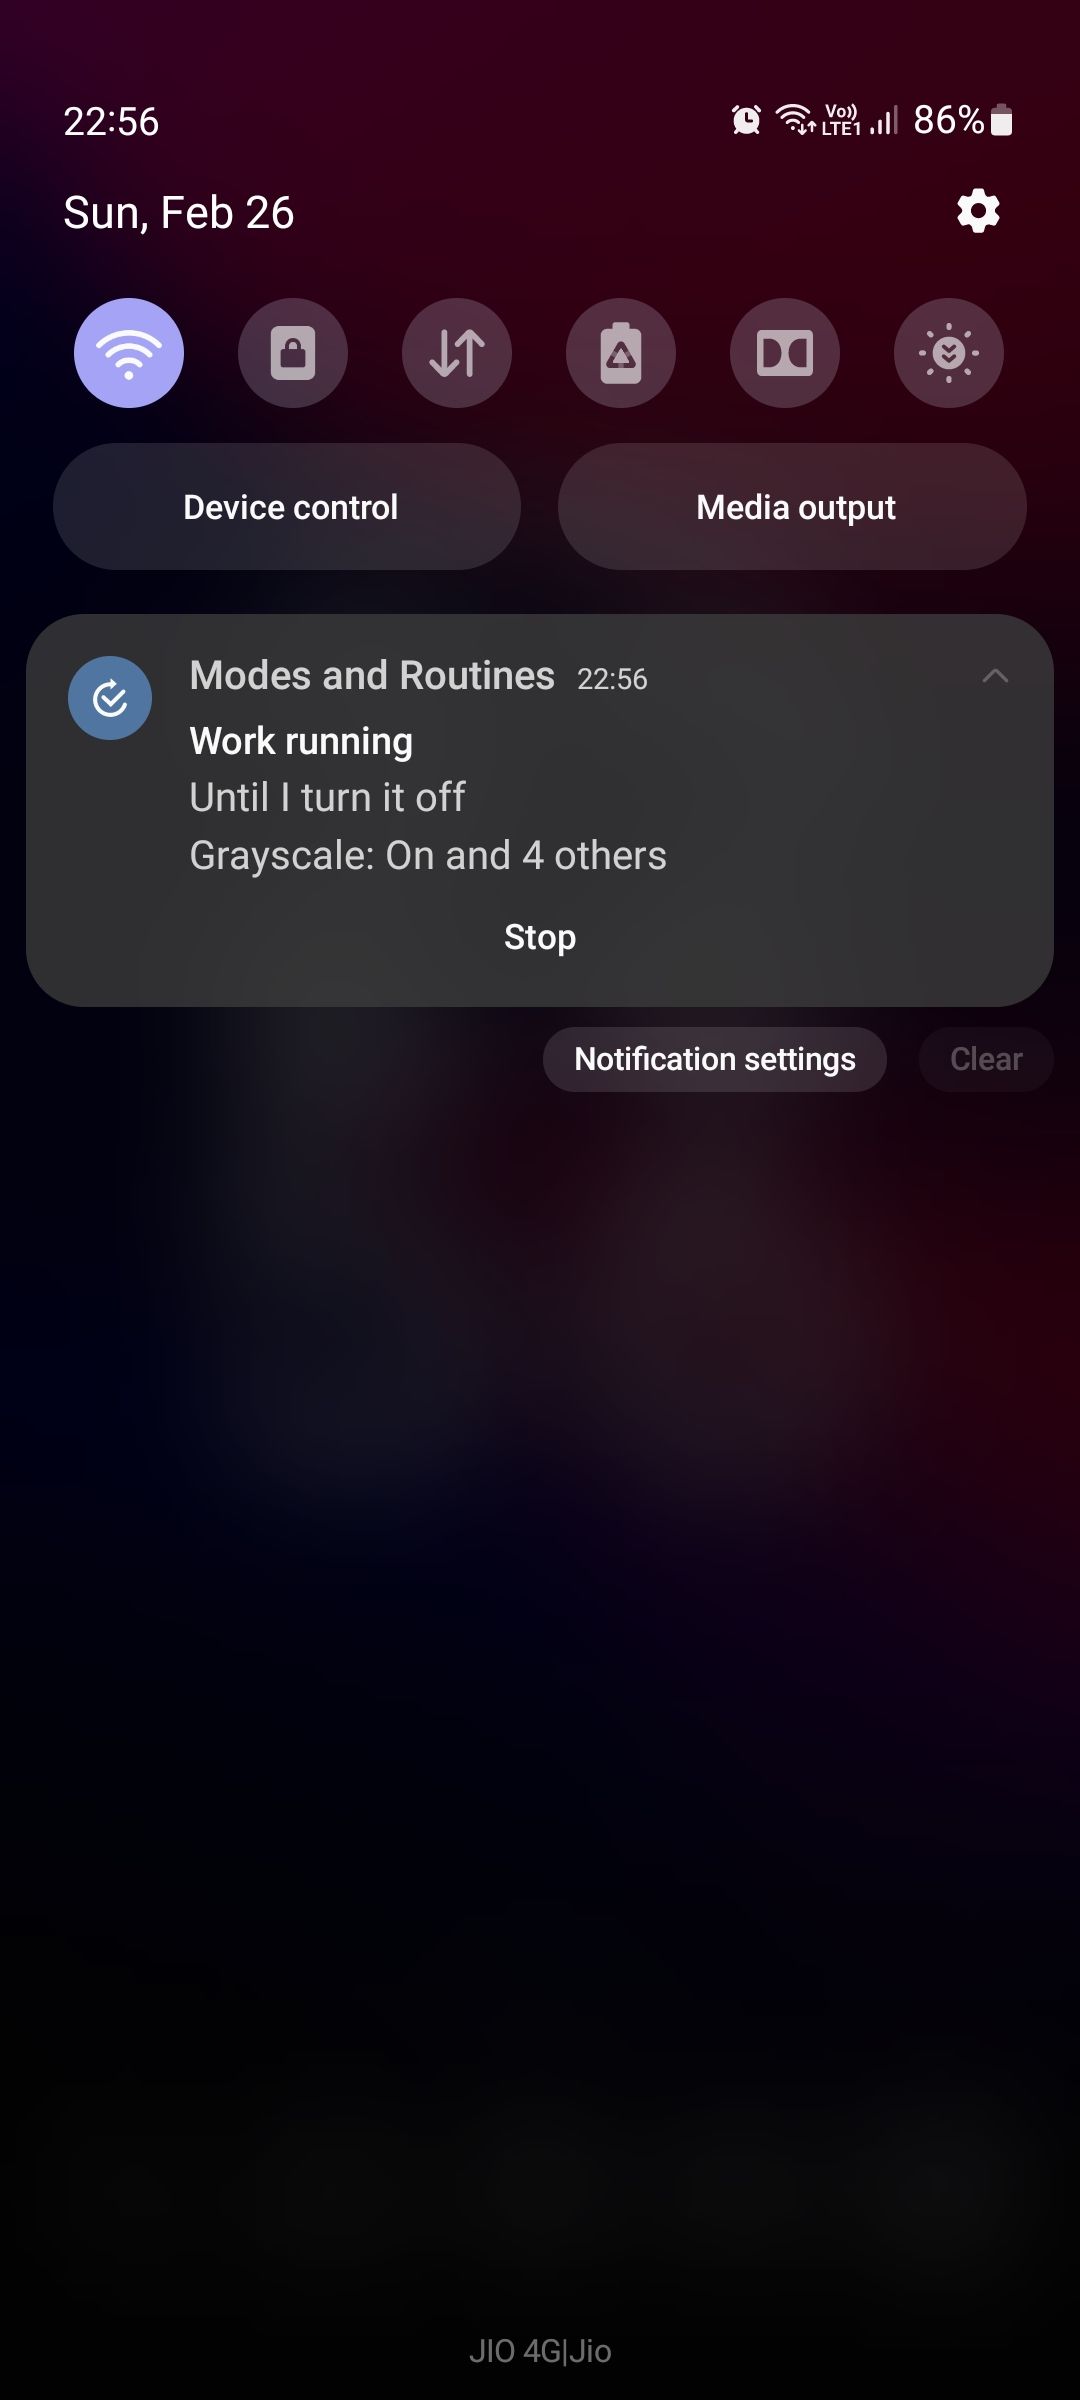 Ongoing routine notification on Samsung